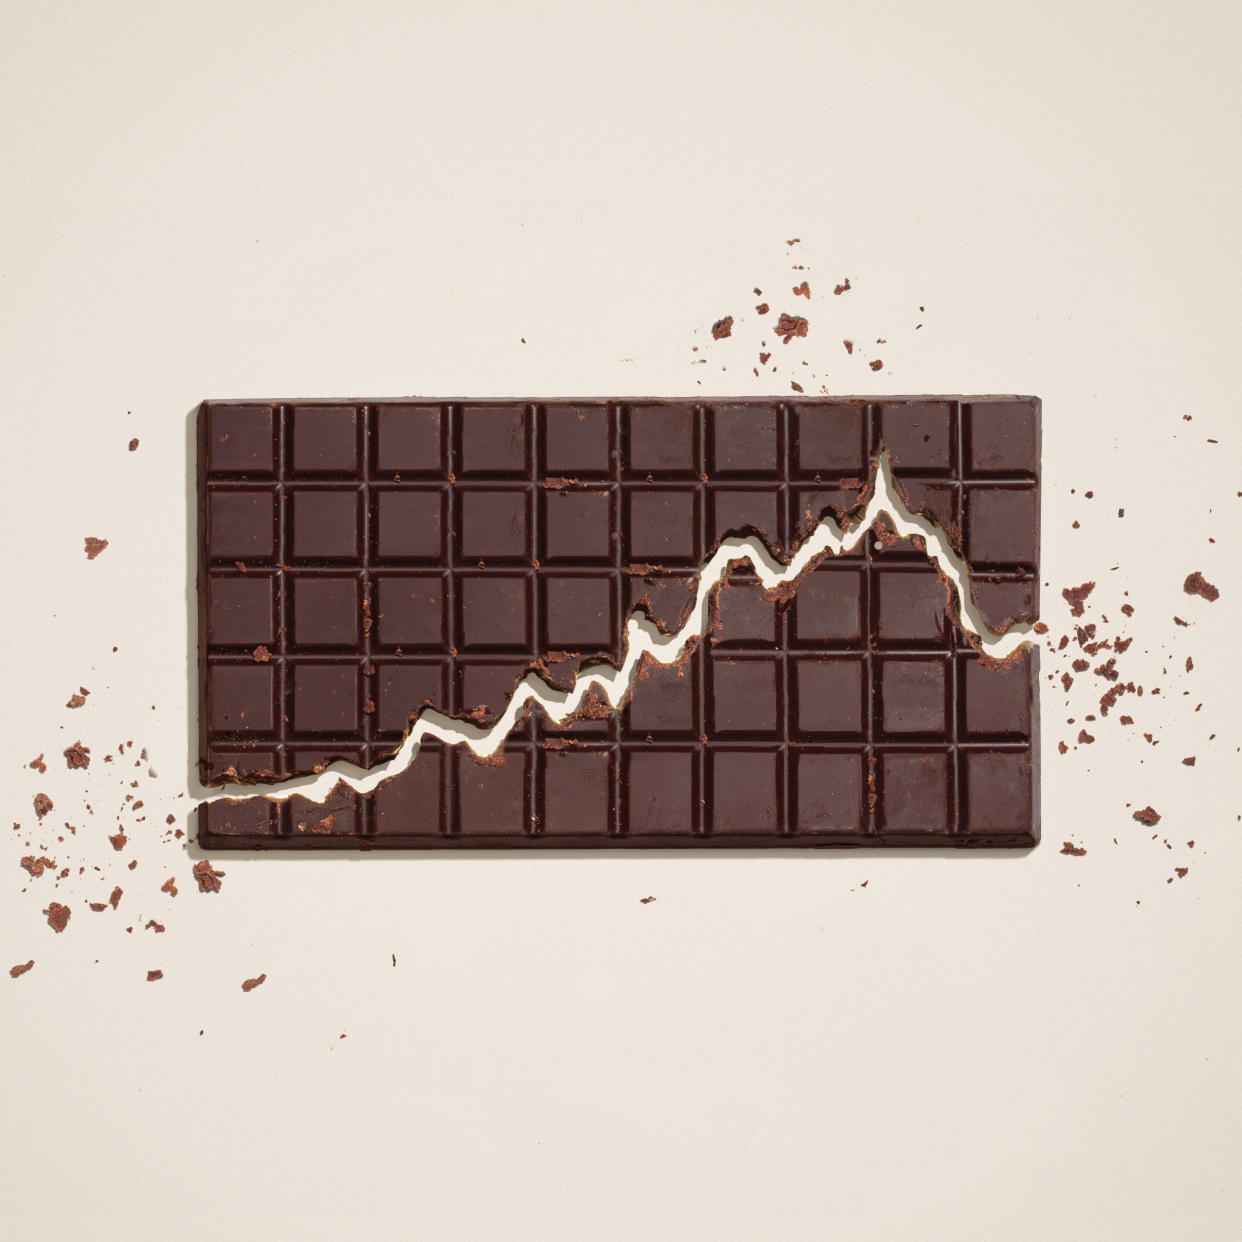 Cocoa prices are going nuts, after a crop failure in West Africa was followed by a rush of investor speculation. (Carl Godfrey/The New York Times)